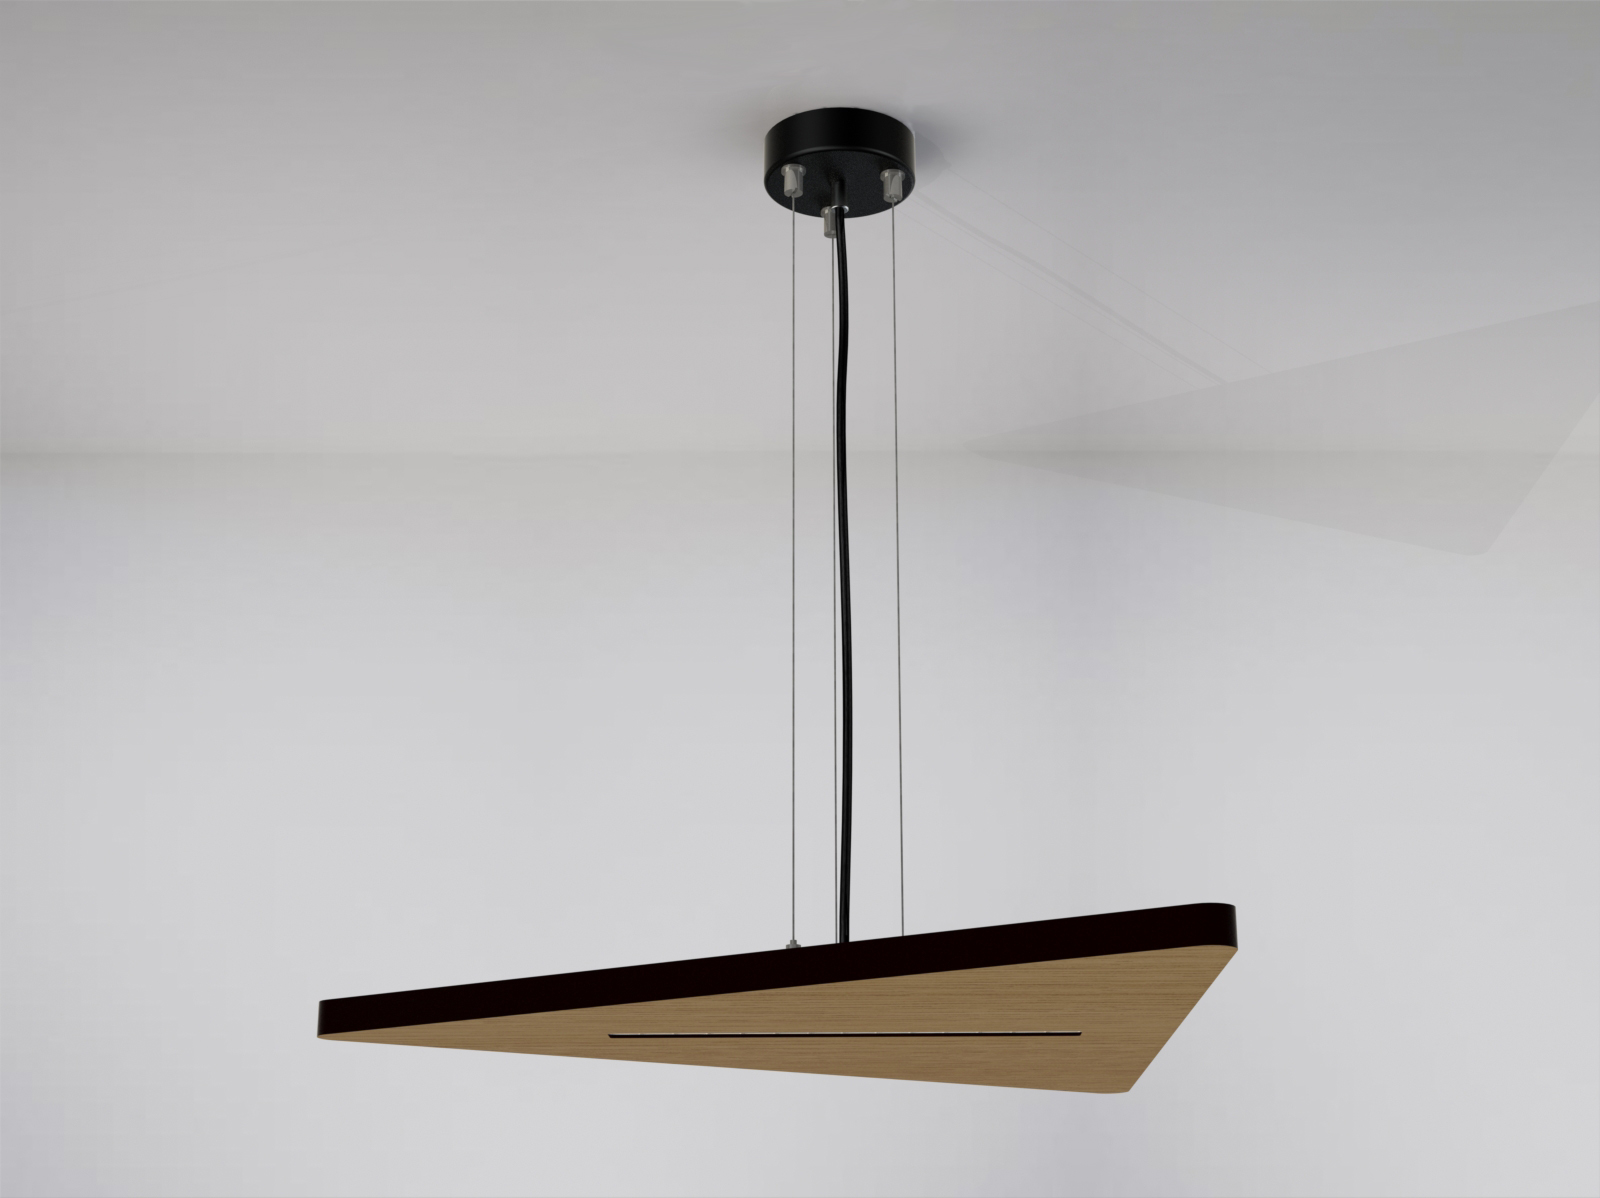 You are currently viewing Lightifornication – a new triangular lamp Ledowski’s offer